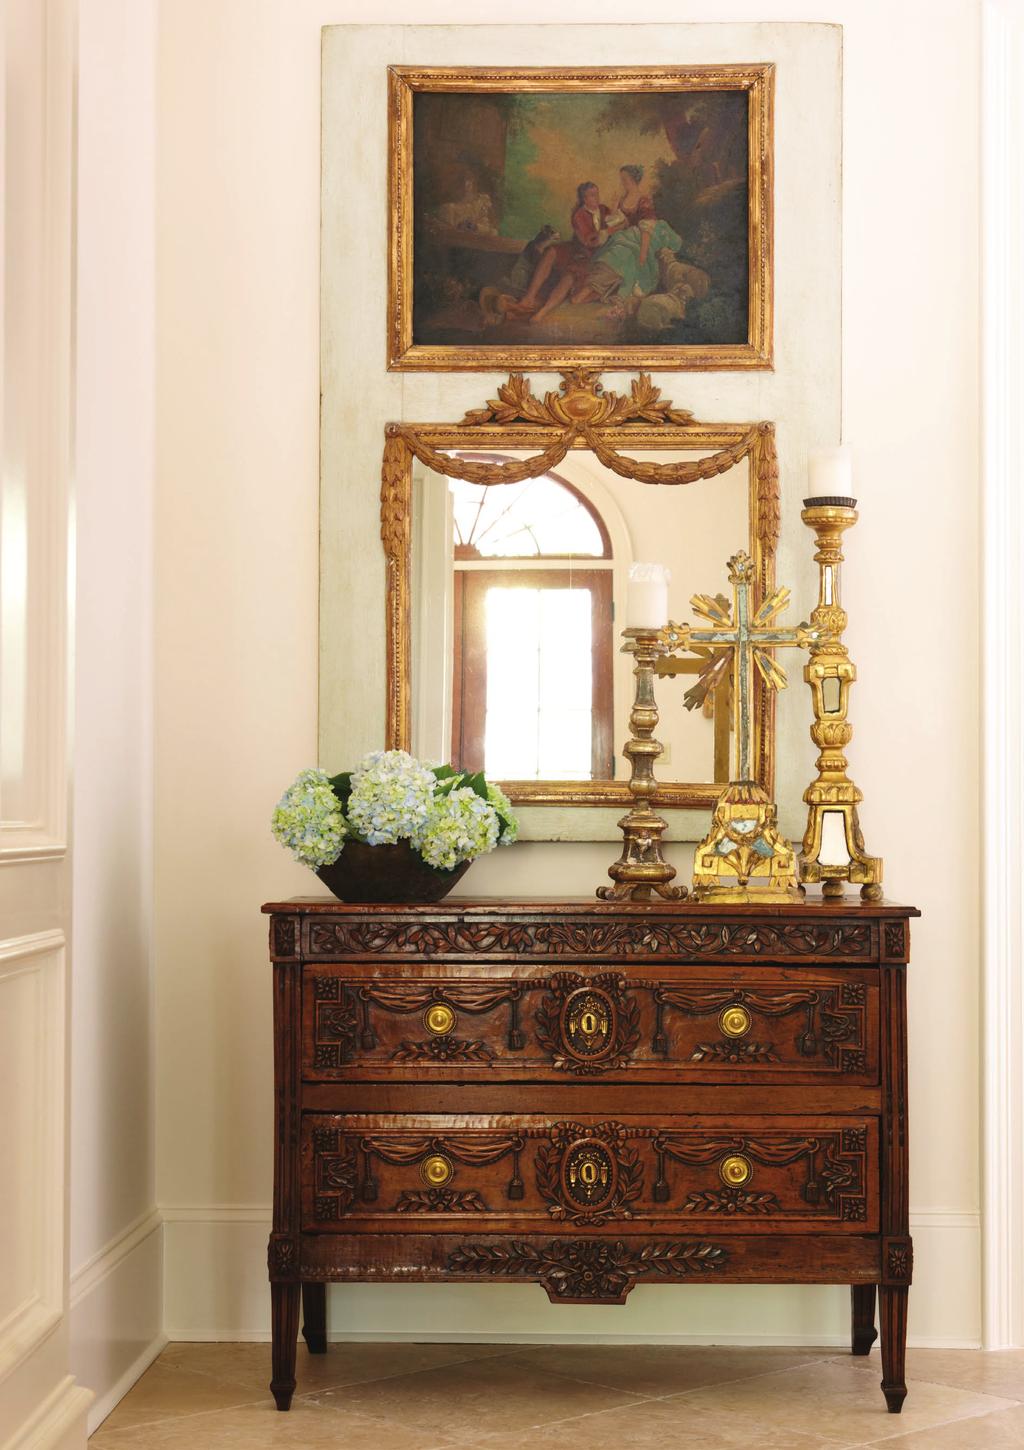 THIS PHOTO: In the foyer, a collection of 18th-century altar sticks and bois doré (gilded wood) mirrored crosses sit atop a Louis XVI walnut commode from a château near Cassis, France.